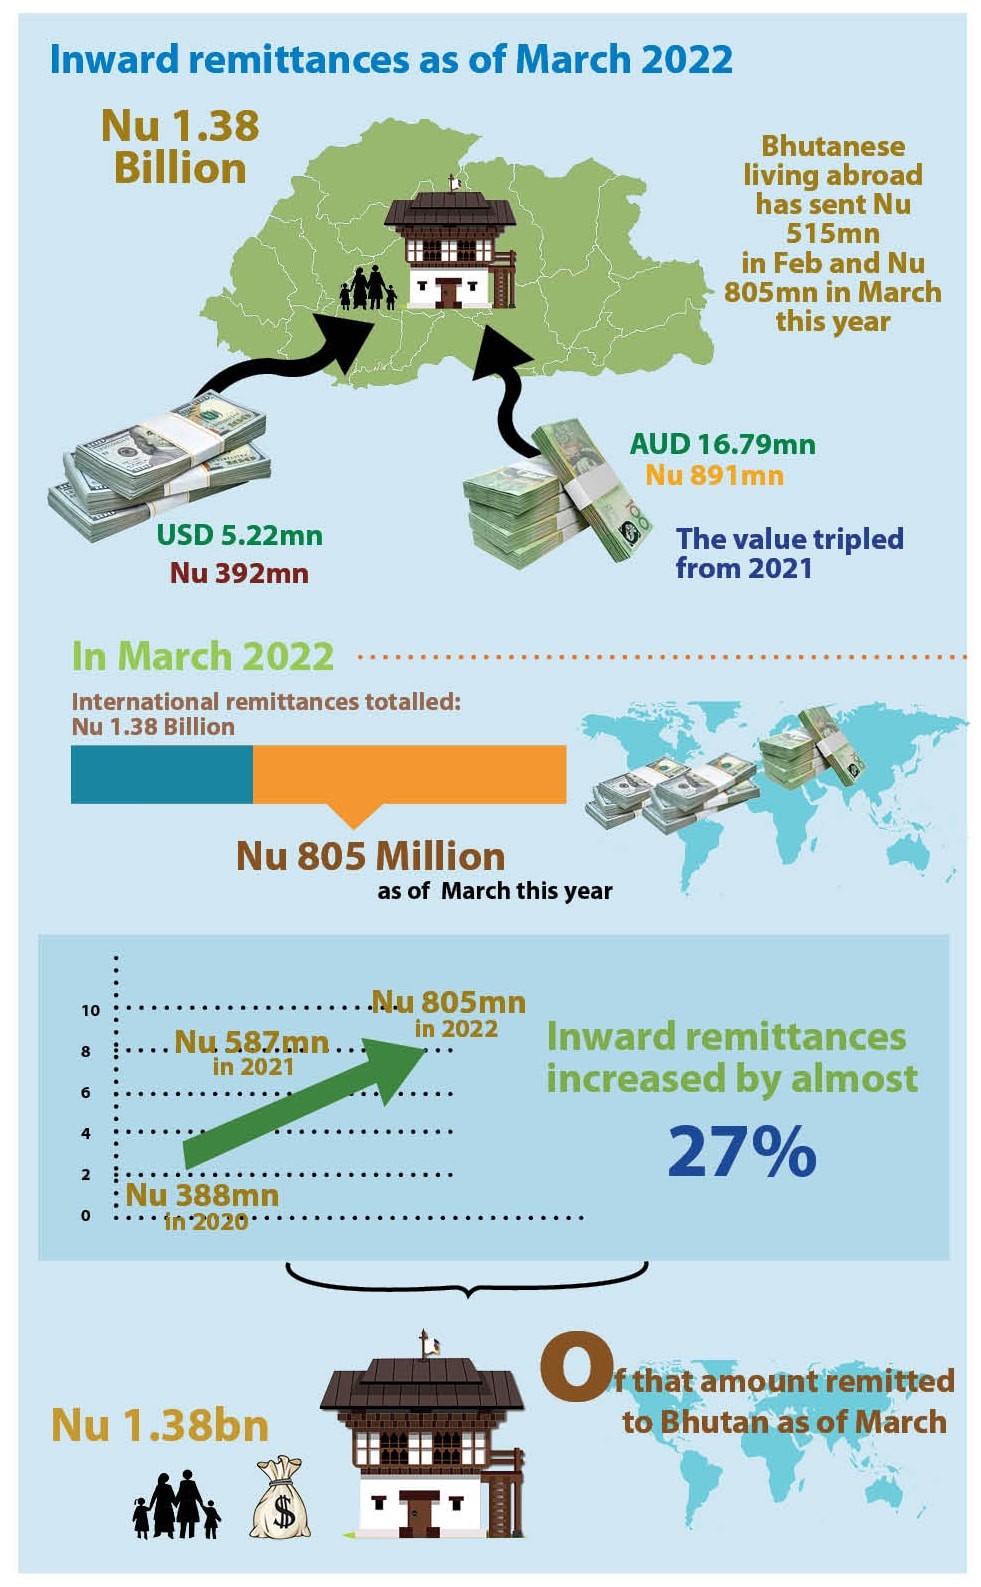 Inward remittances hit all-time high in March